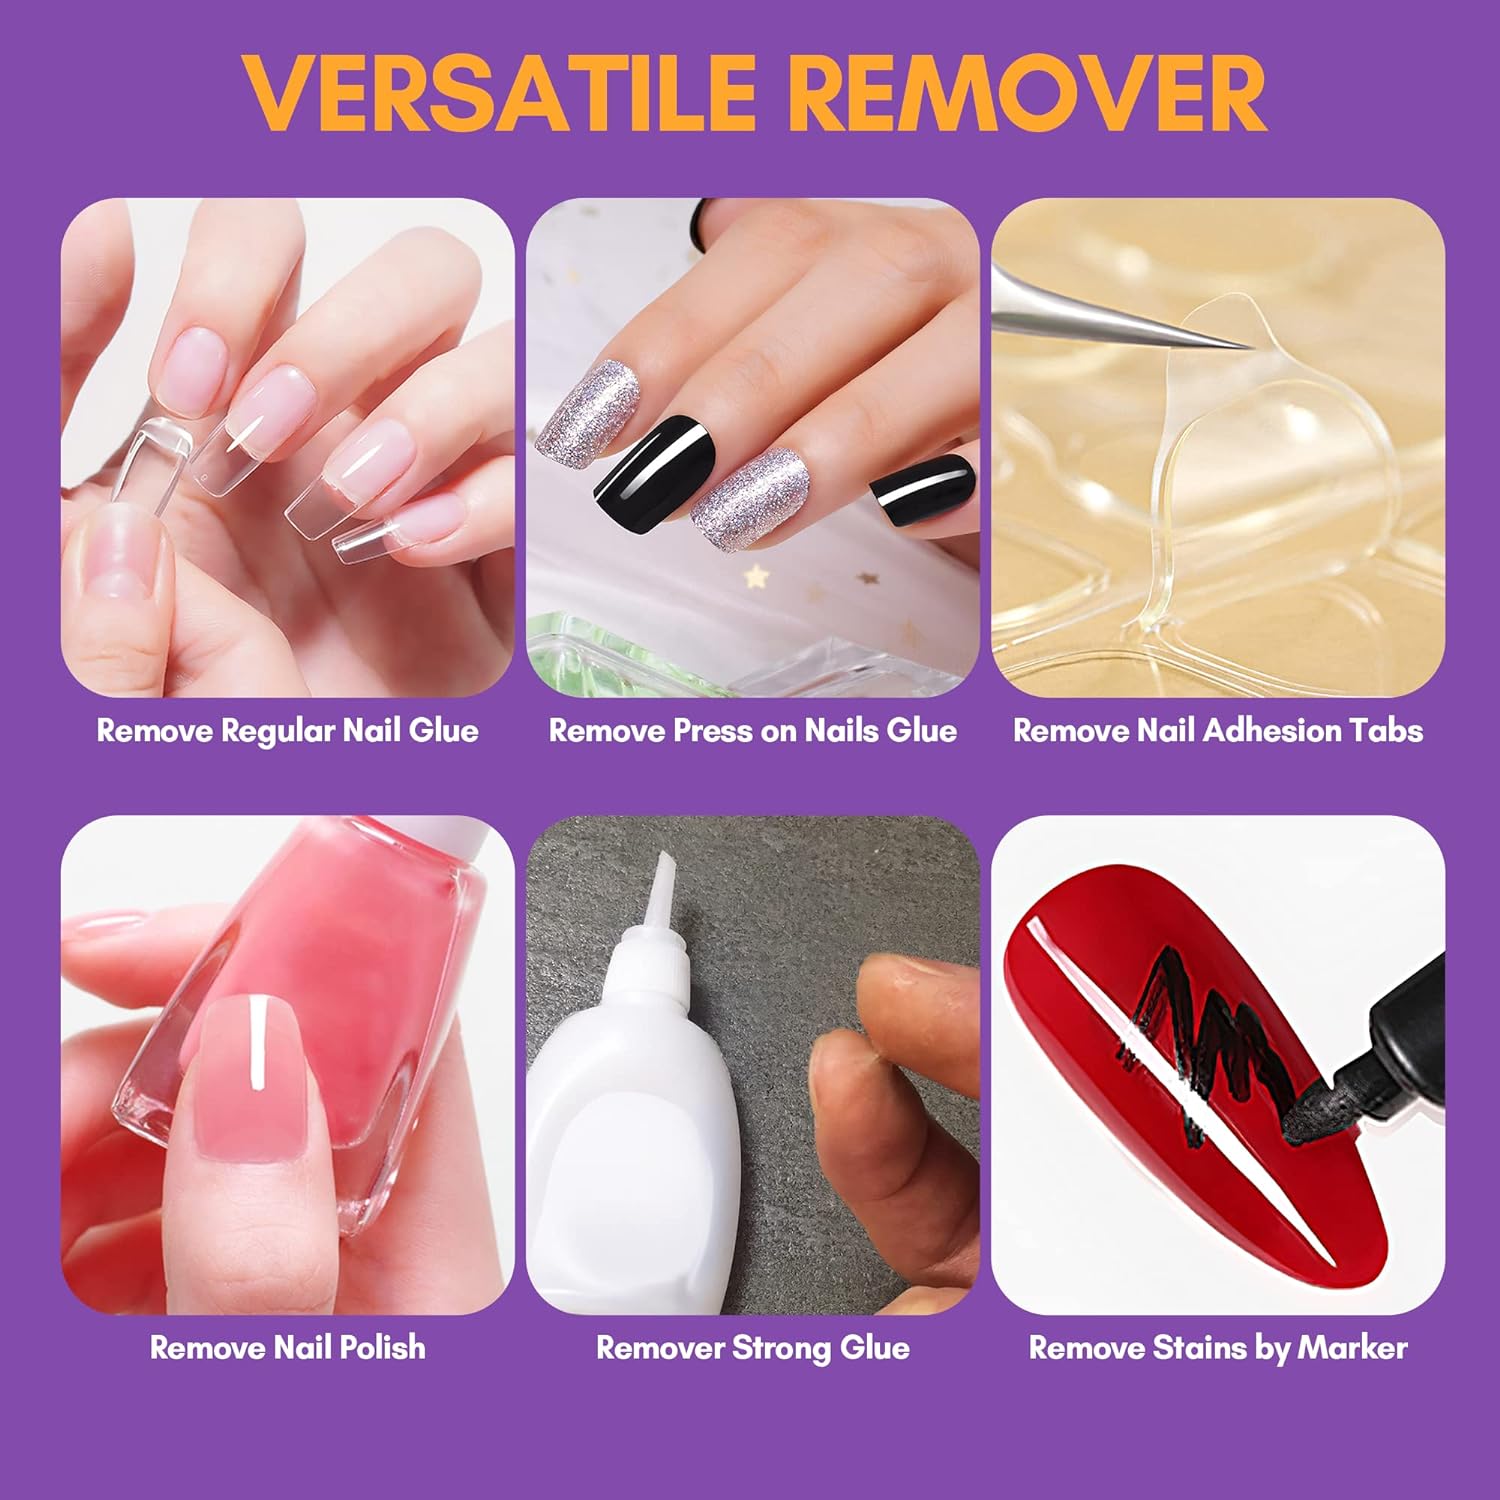 How to Remove Nail Glue from Skin